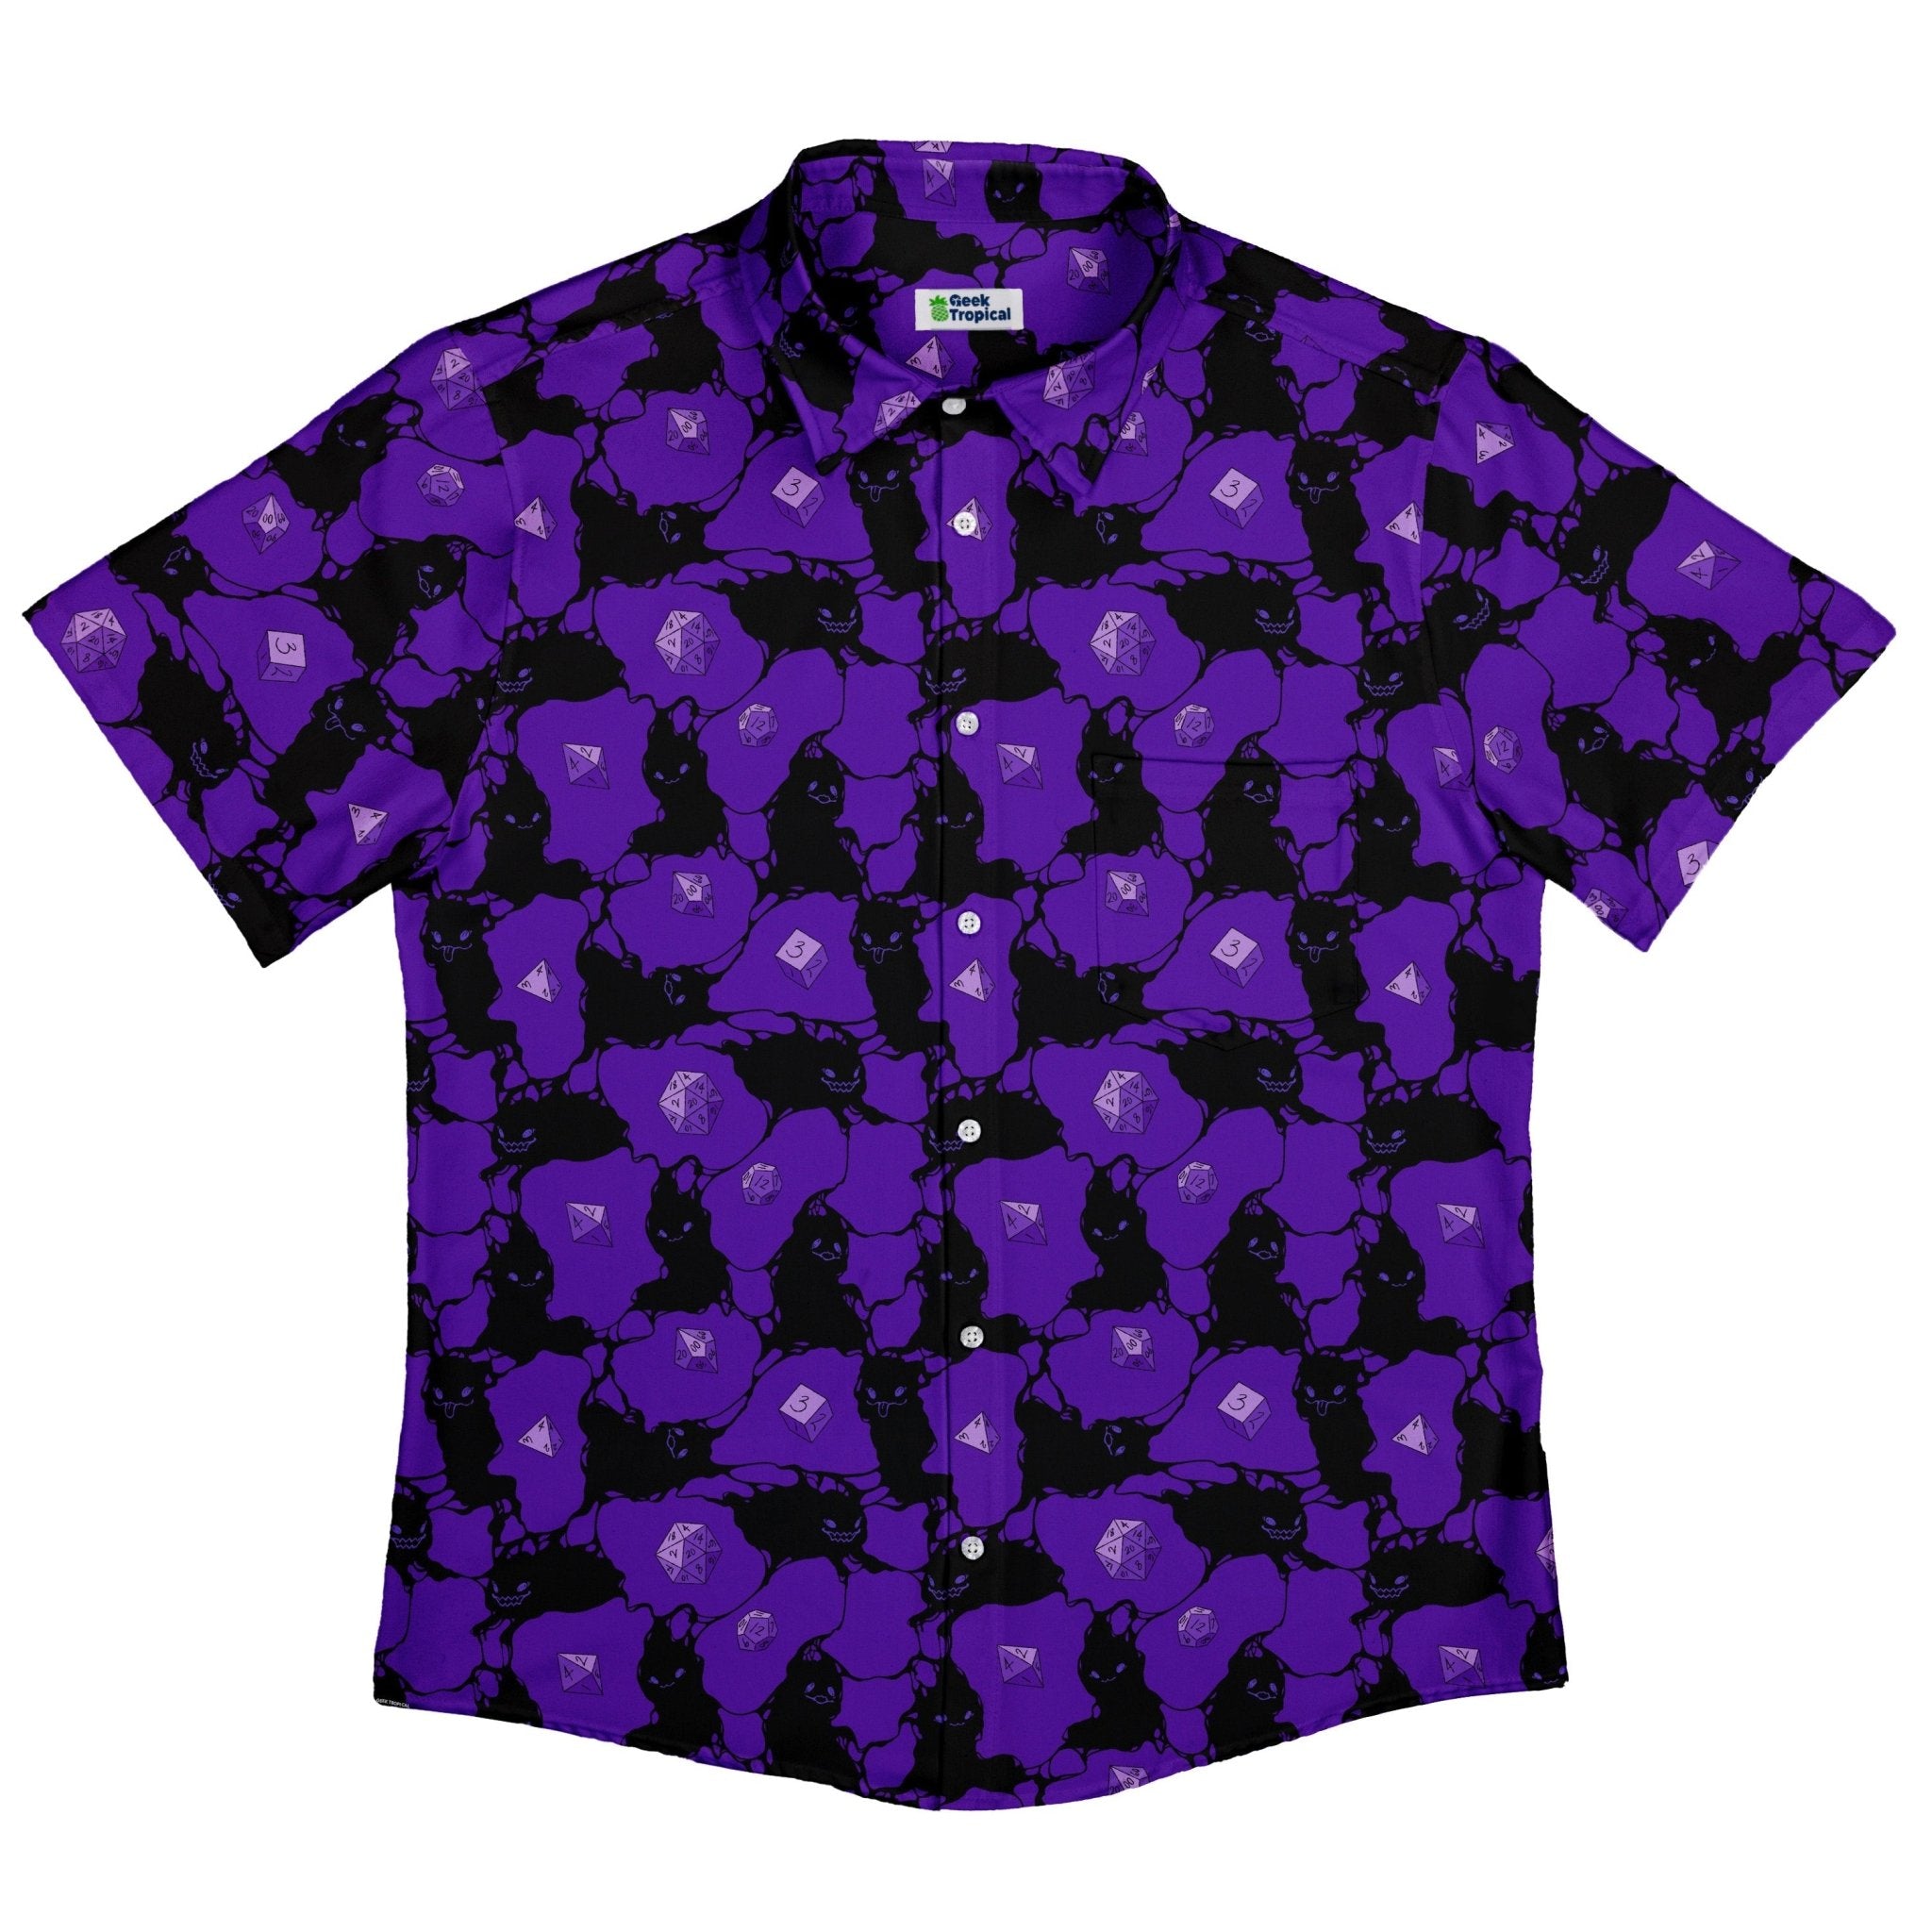 Dnd Inkling Familiars Button Up Shirt - adult sizing - Design by Ardi Tong - dnd & rpg print